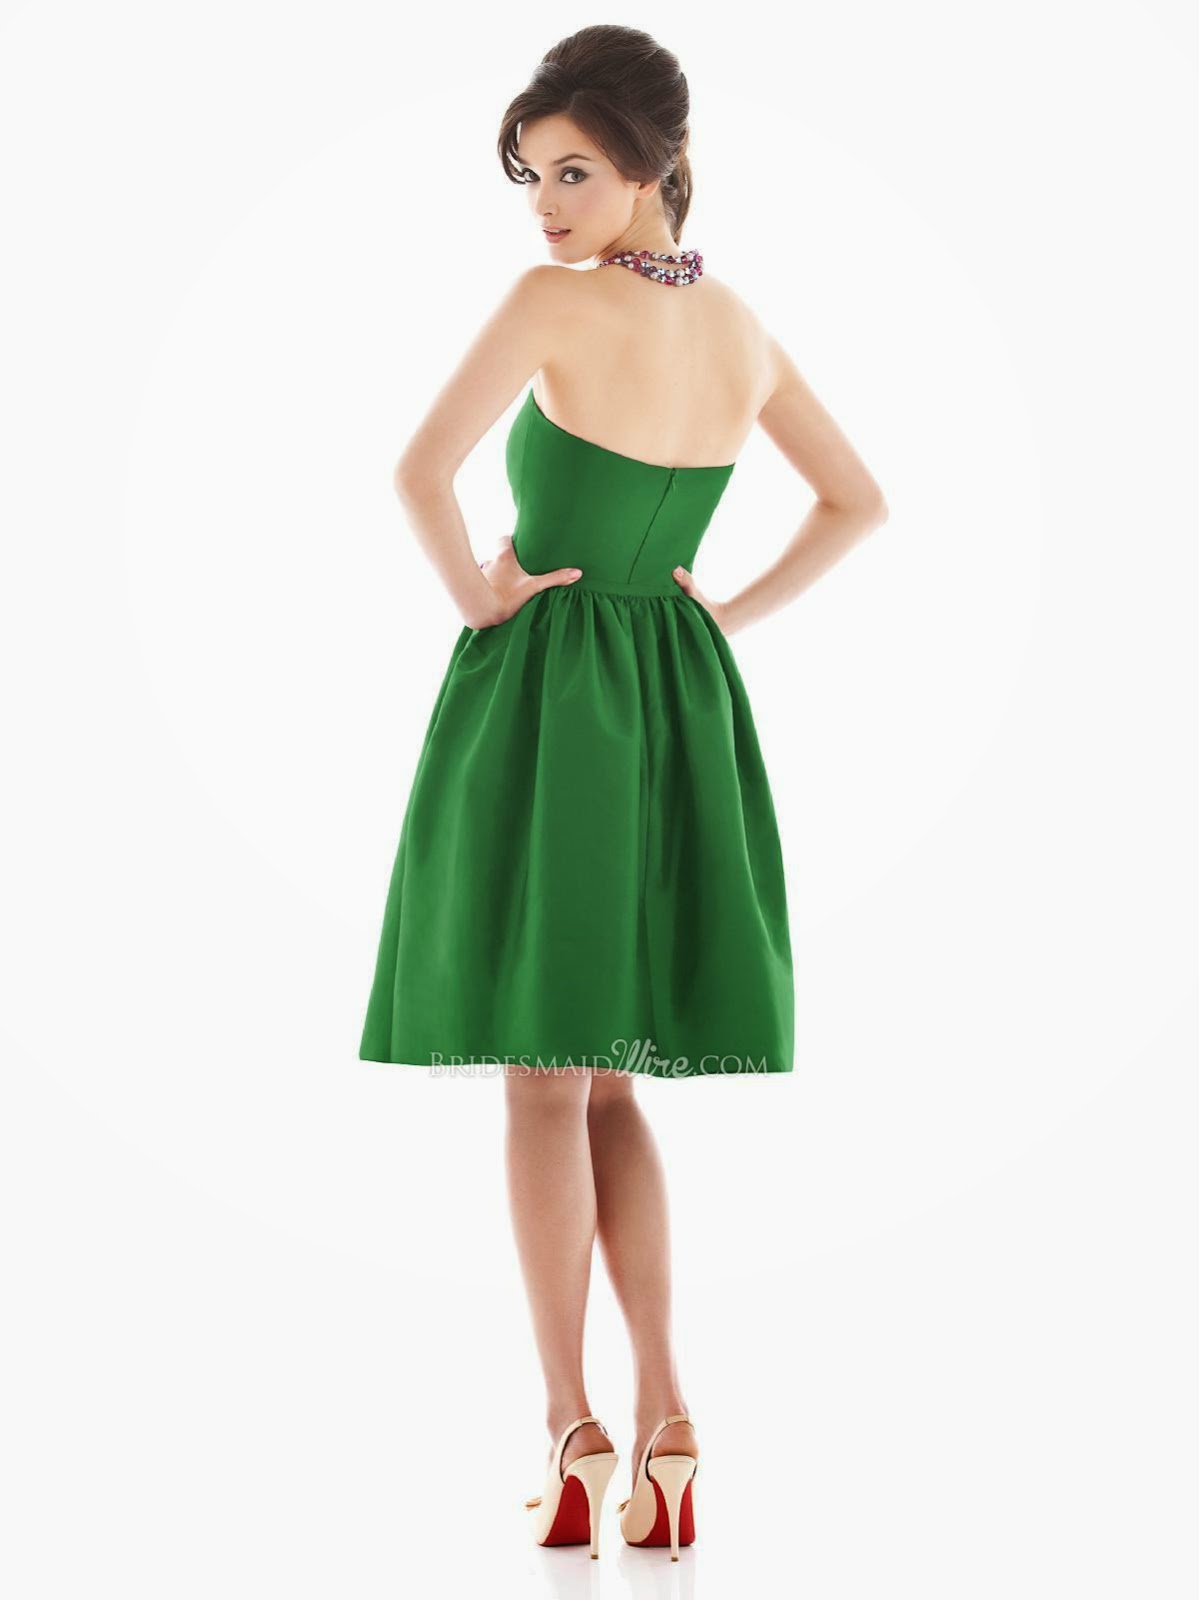 Ivy Halter Cocktail Bridesmaid Dress with Top Stitched Straps-2